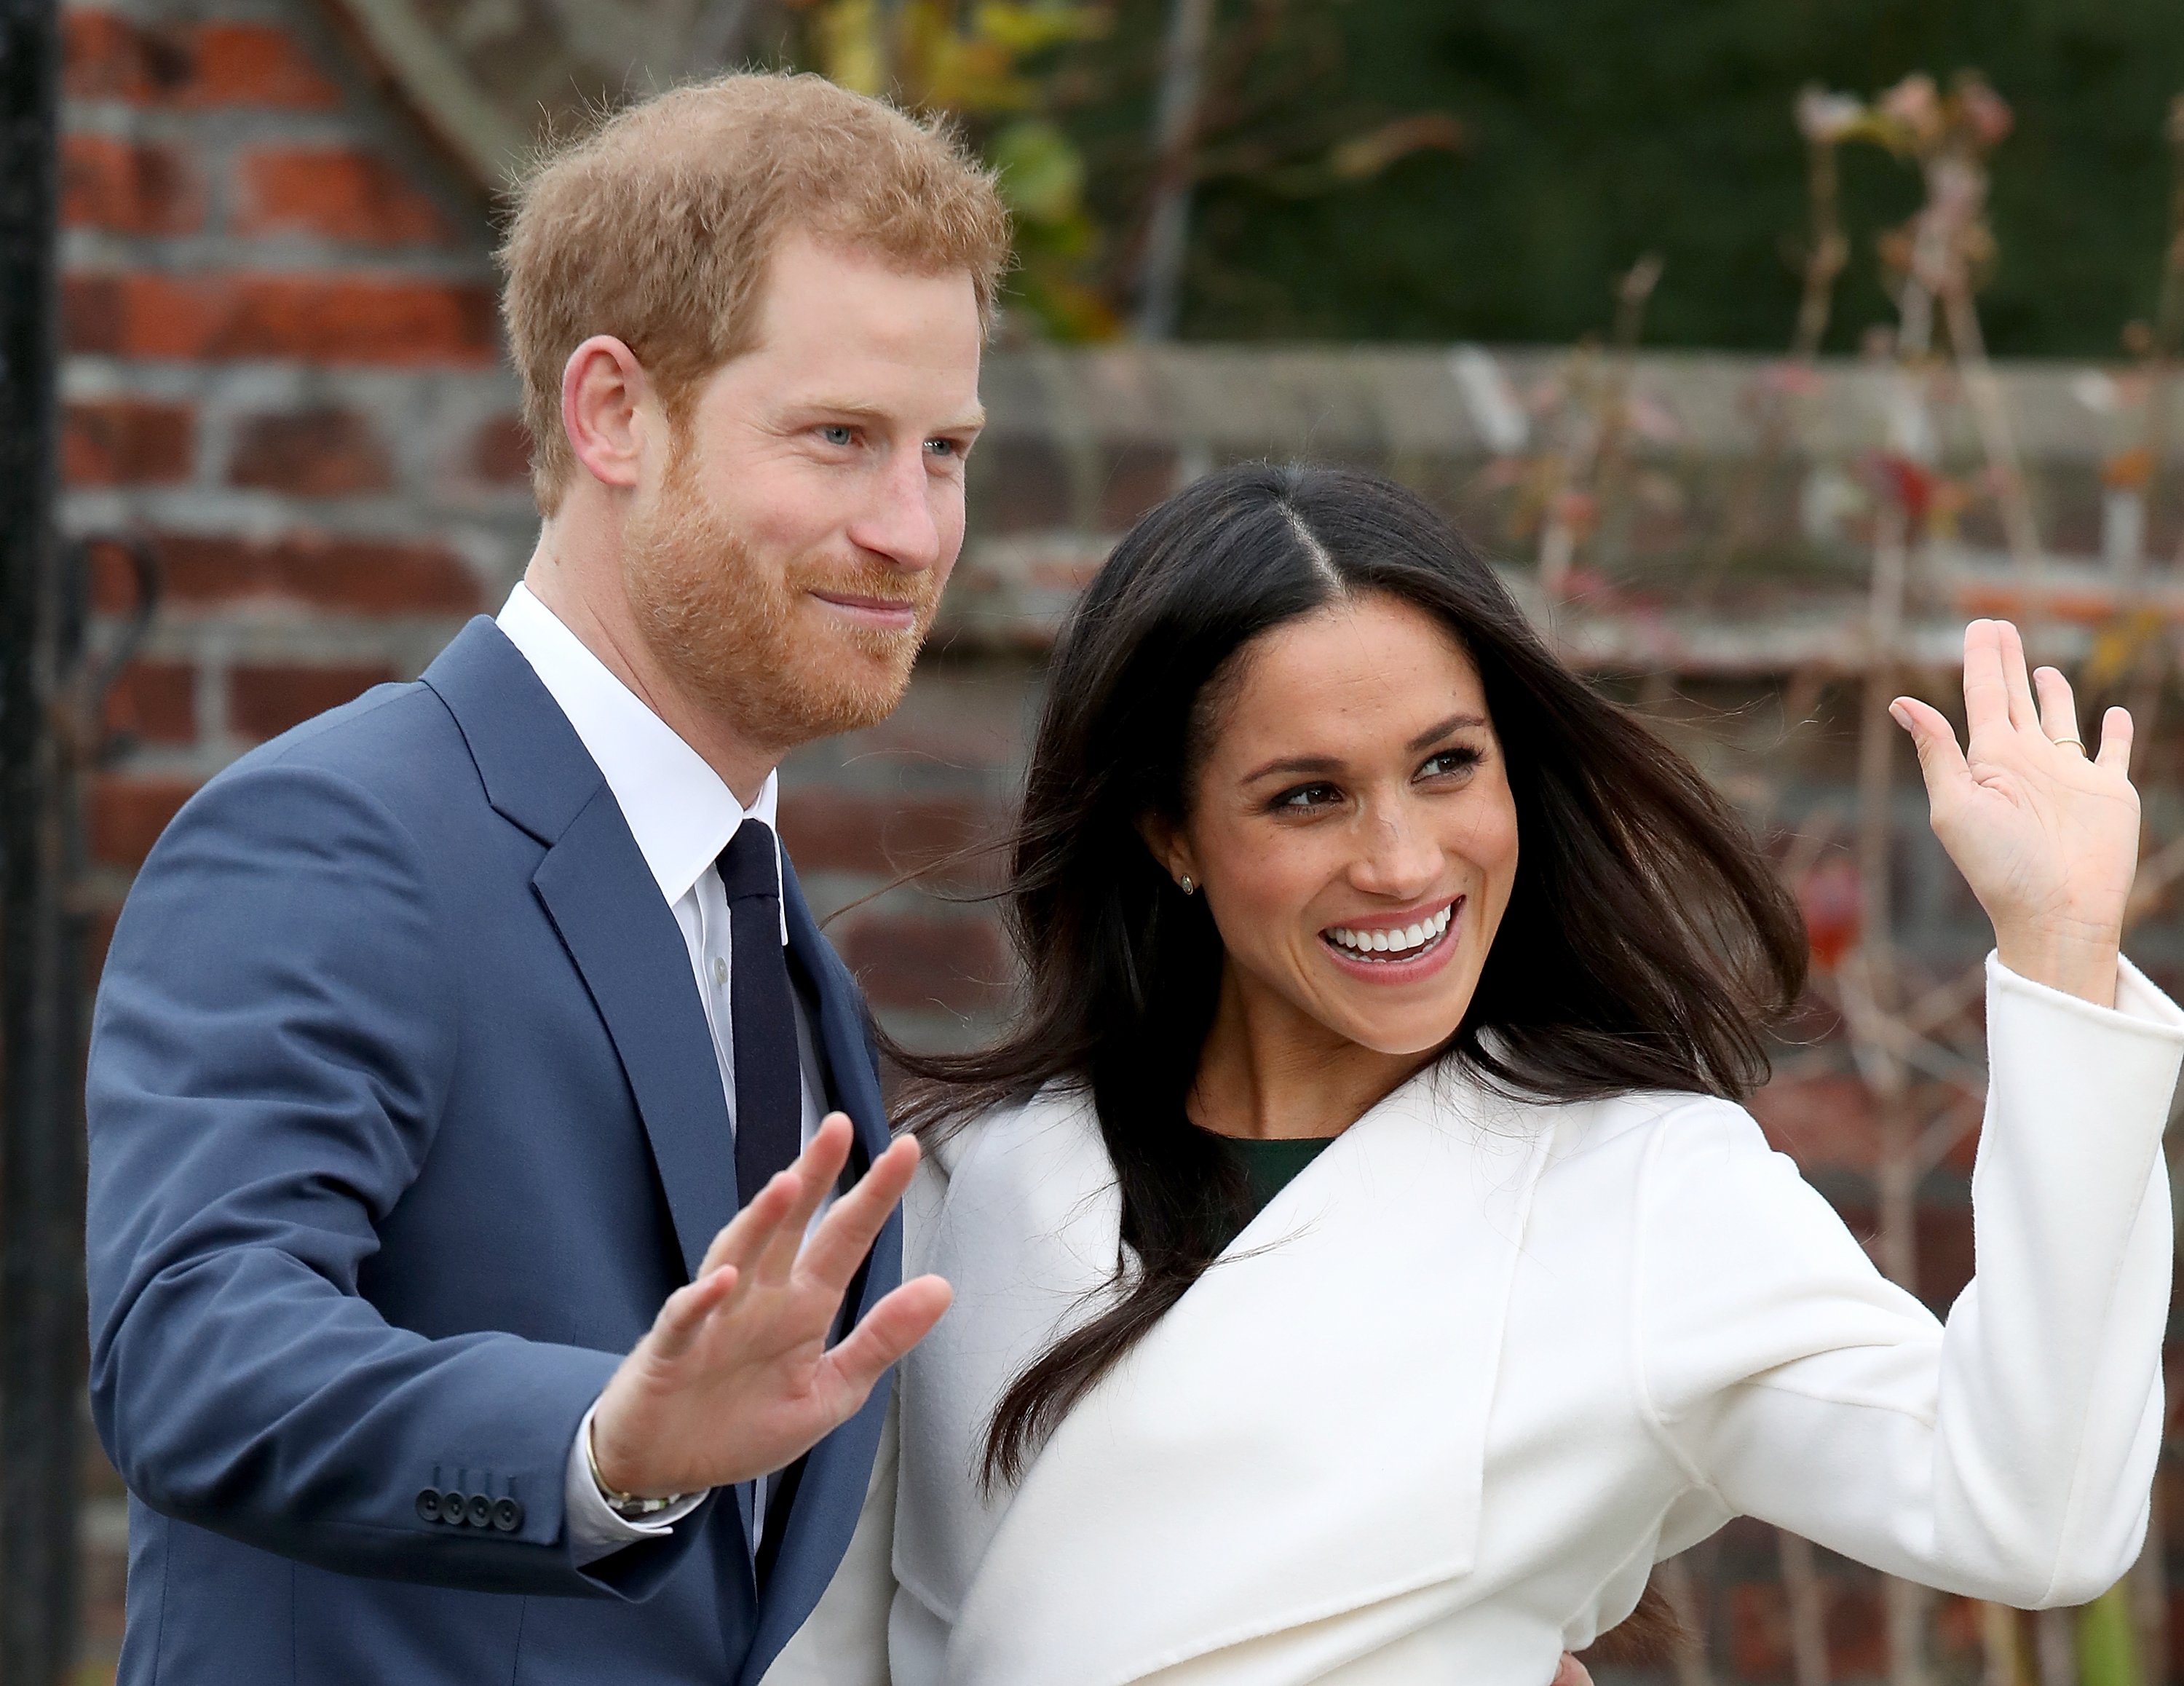 Prince Harry and Meghan Markle pose for an engagement announcement at Kensington Palace in London, England on November 27, 2017 | Photo: Getty Images